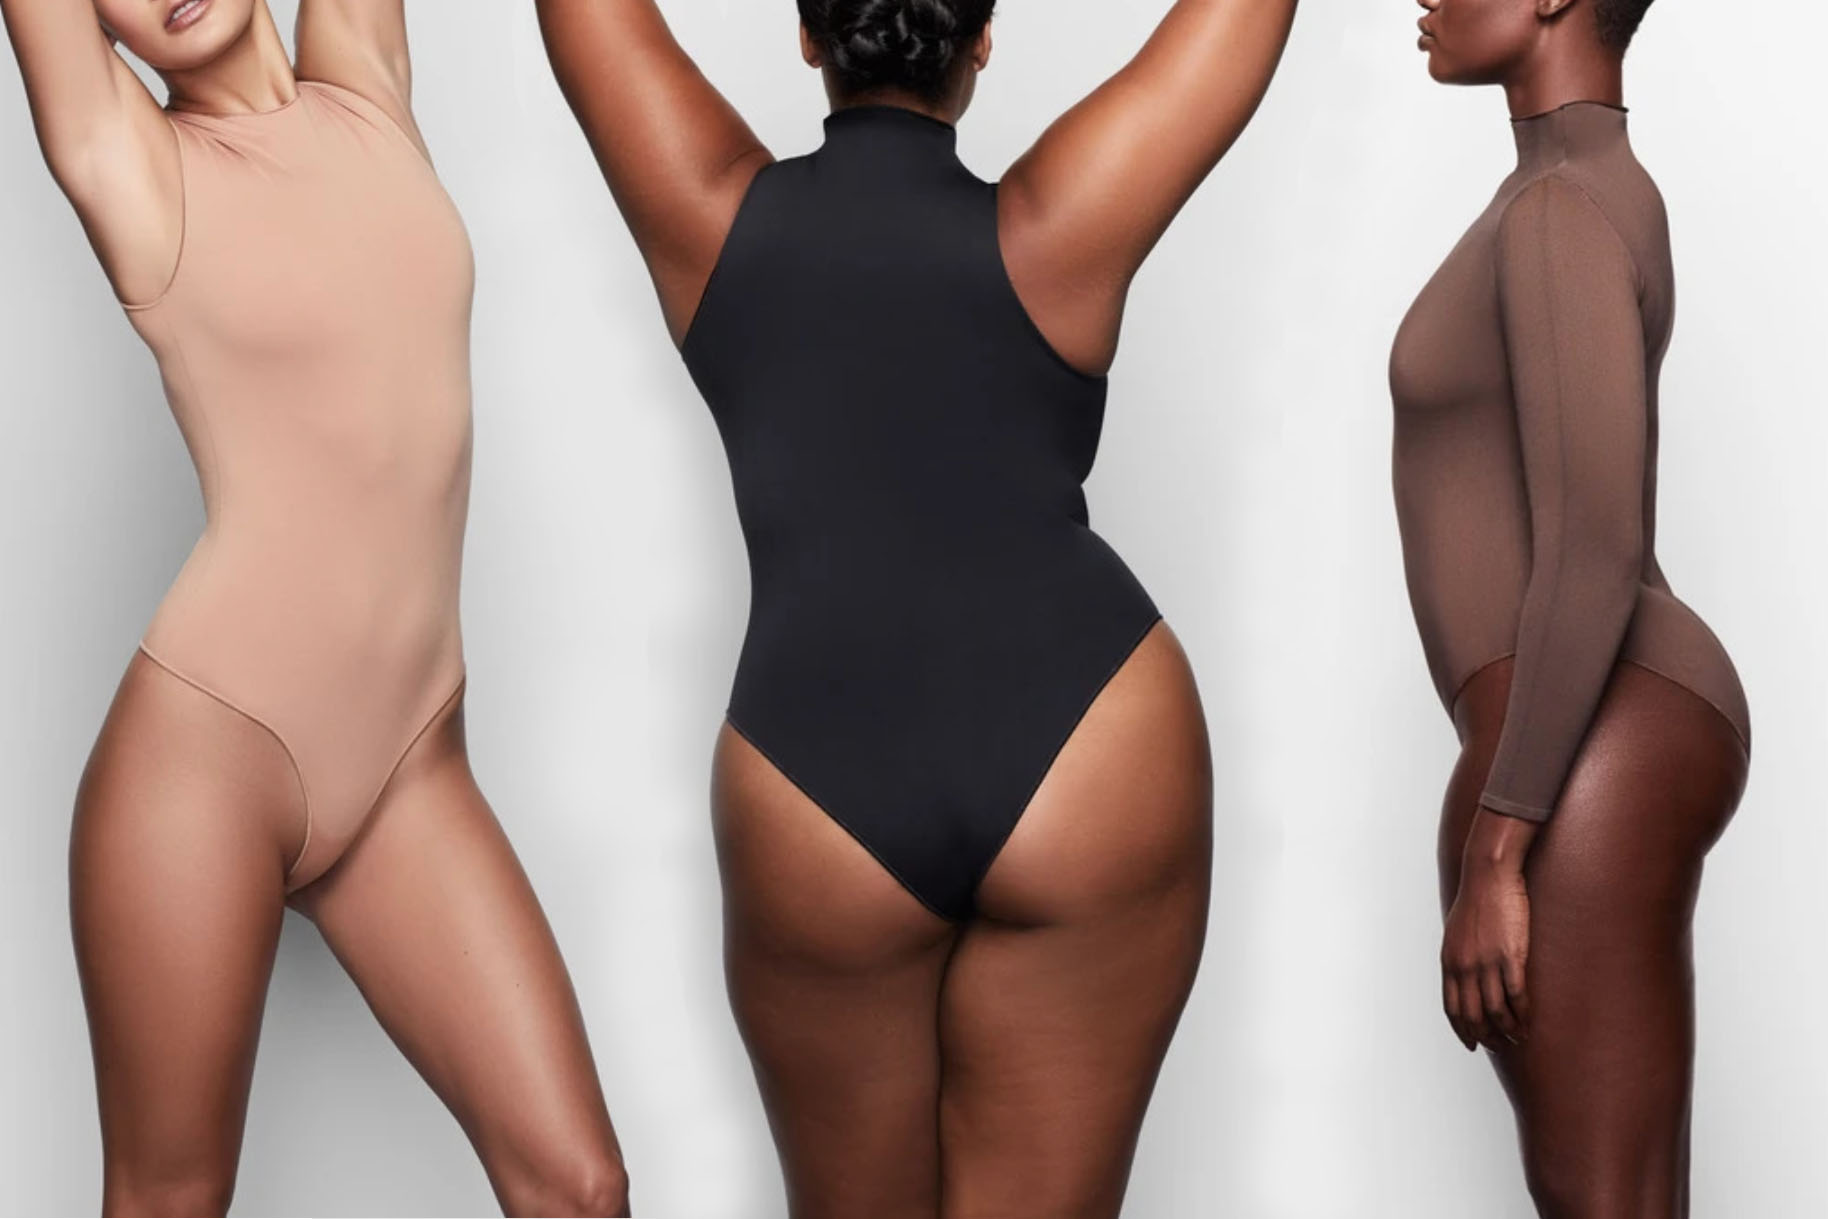 Kim Kardashian's New SKIMS Bodysuit Collection Is Available to Shop Now